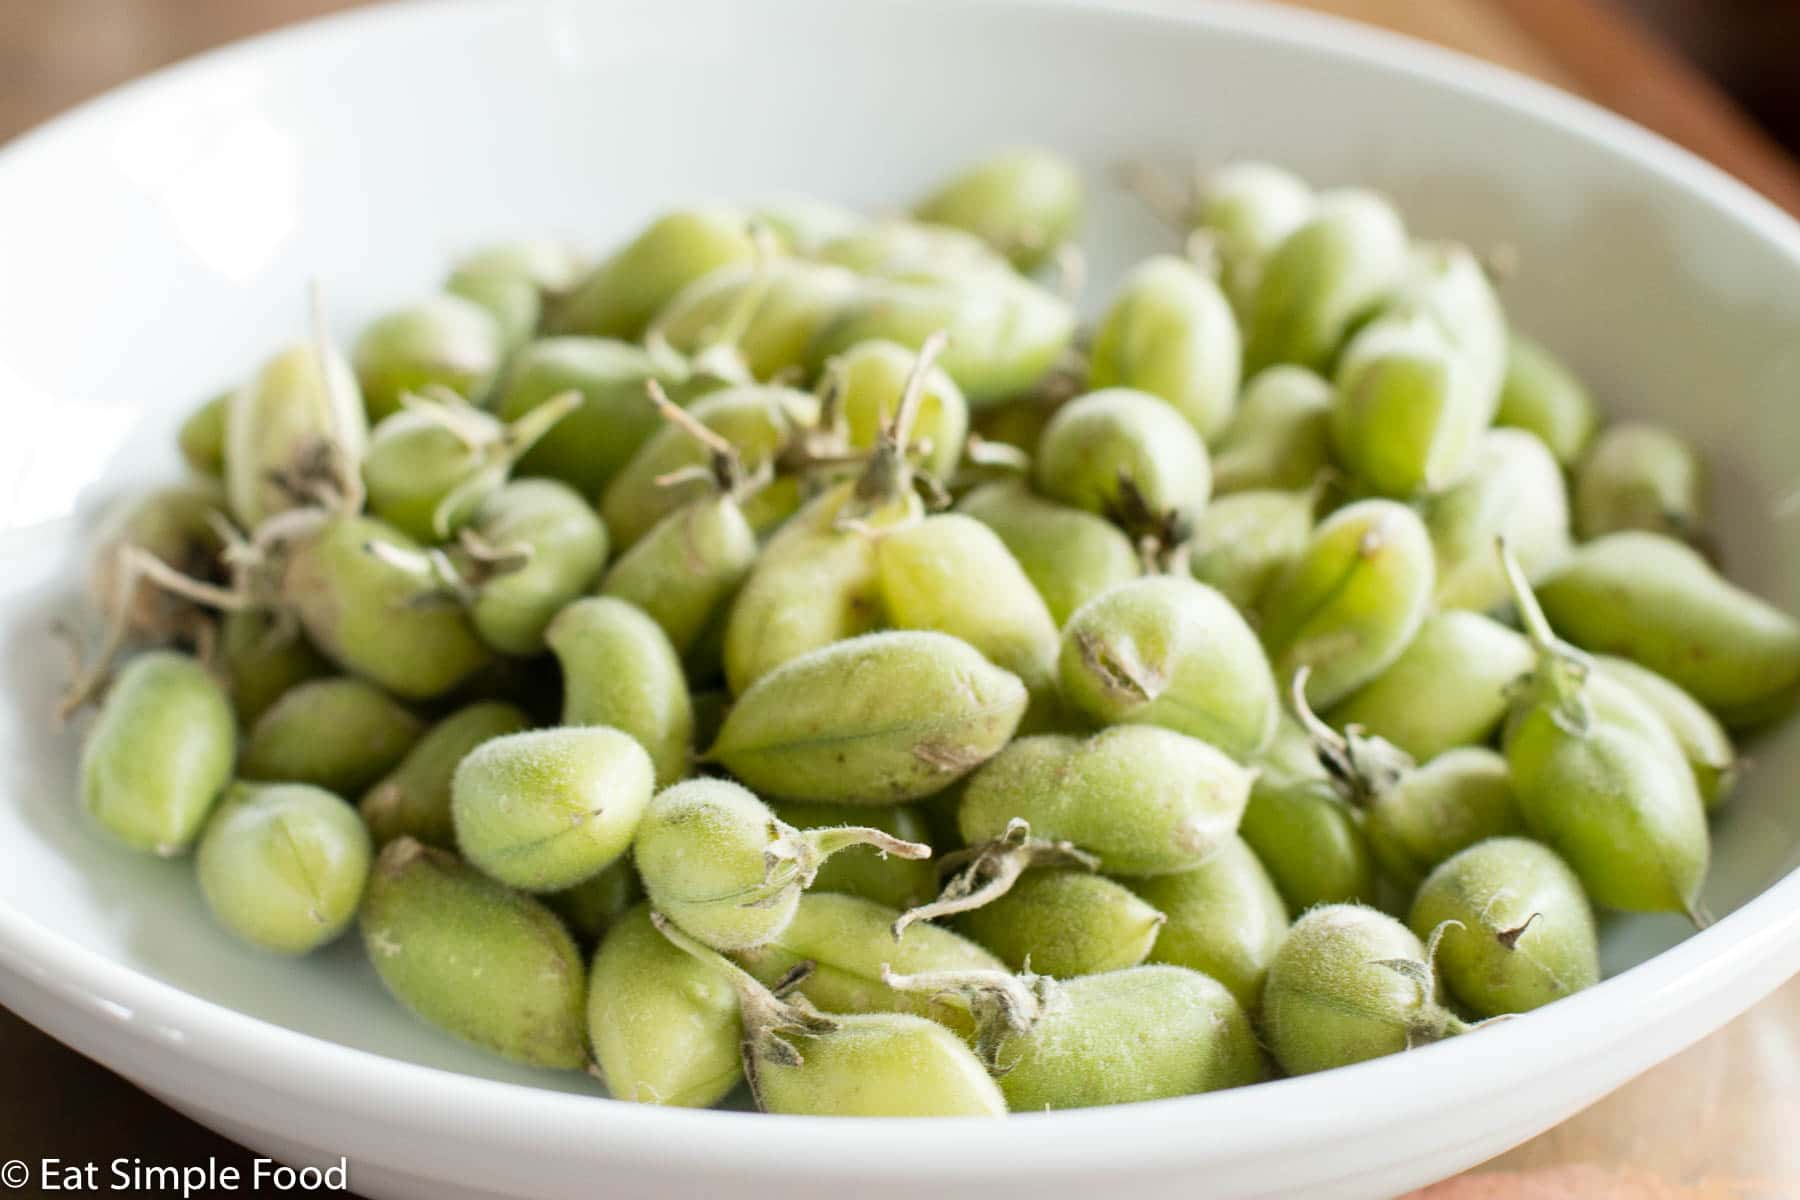 Fresh Chickpeas Beans ( Green Chickpeas ) unshelled close up in a white bowl.